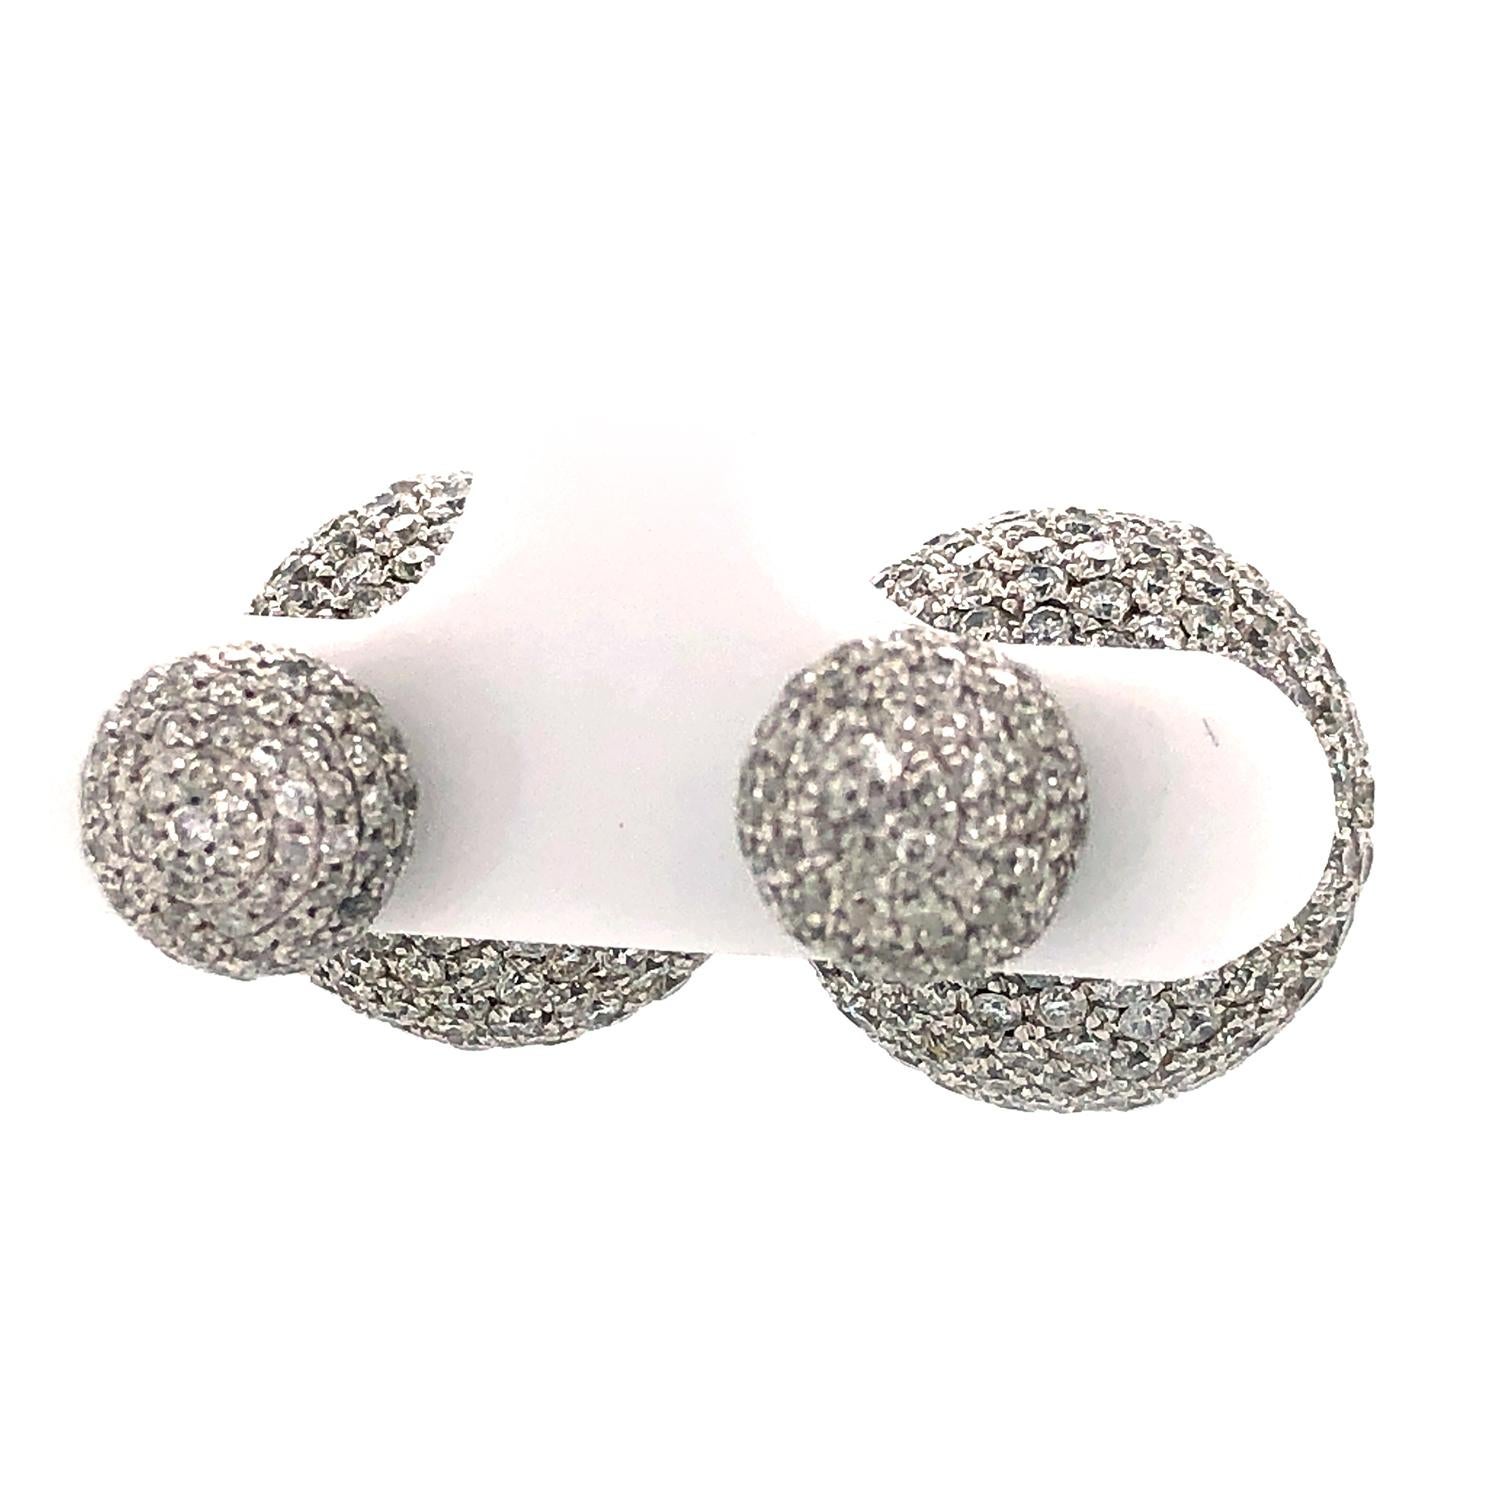 Art Deco White Pave Diamond Ball Earrings Made In 18k Gold & Silver For Sale